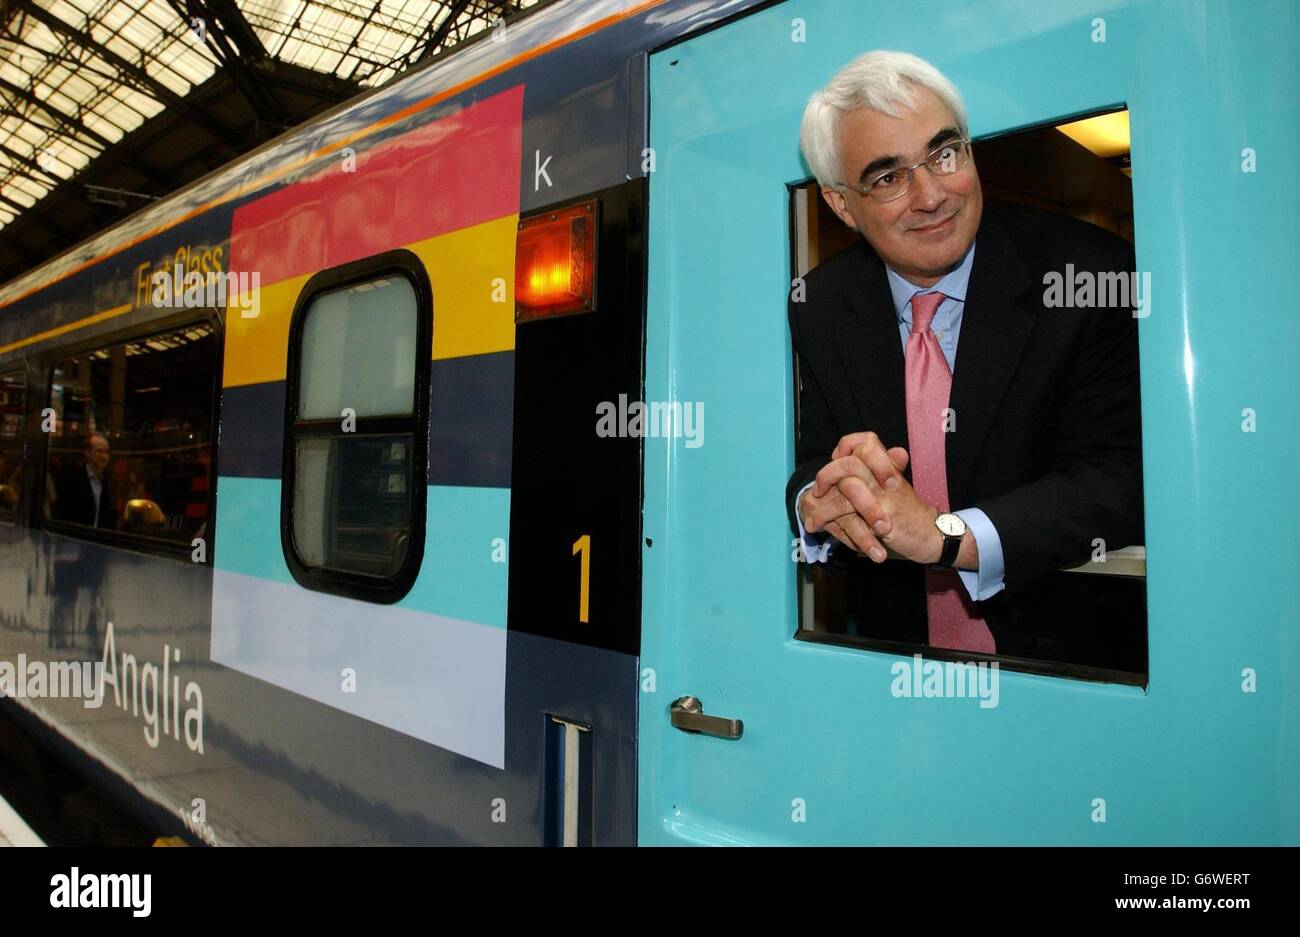 Transport Minister Alistair Darling leans out of a first class carriage on the new Raewald train that he officially unveiled at Liverpool Street Station, London. The train is part of a new franchise combining services from the old Anglia, Great Eastern and West Anglia routes, including the Stansted Express and provides services from London's Liverpool Street station to Hertford, Cambridge, Peterborough, Southend and throughout Essex and to Norwich and east coast resorts. Stock Photo